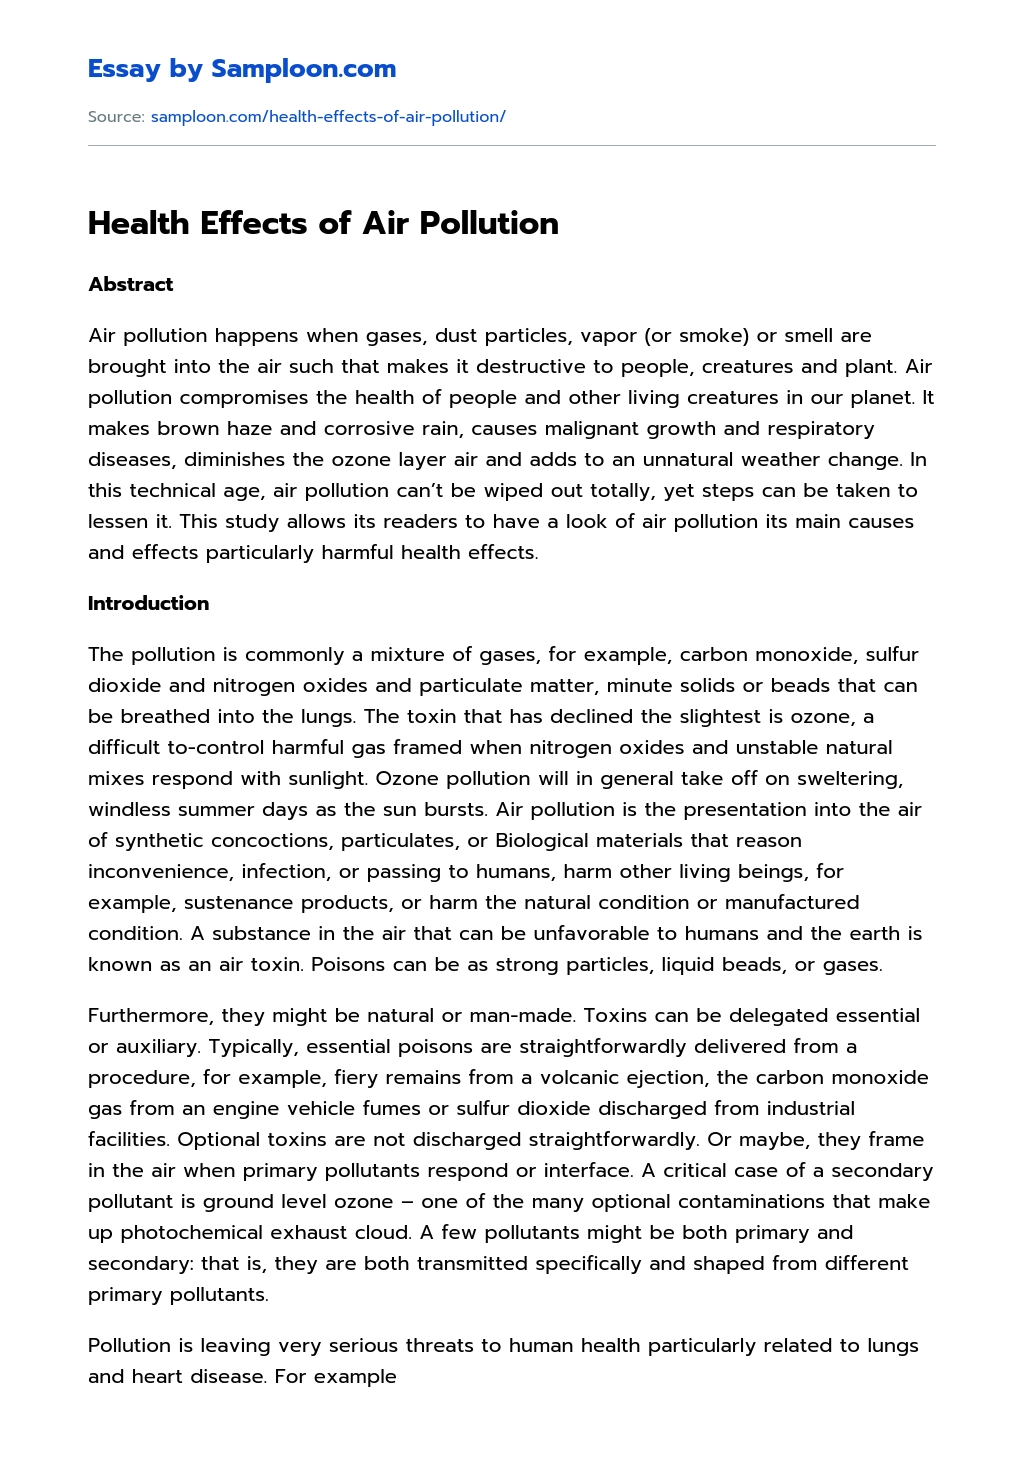 Health Effects of Air Pollution essay